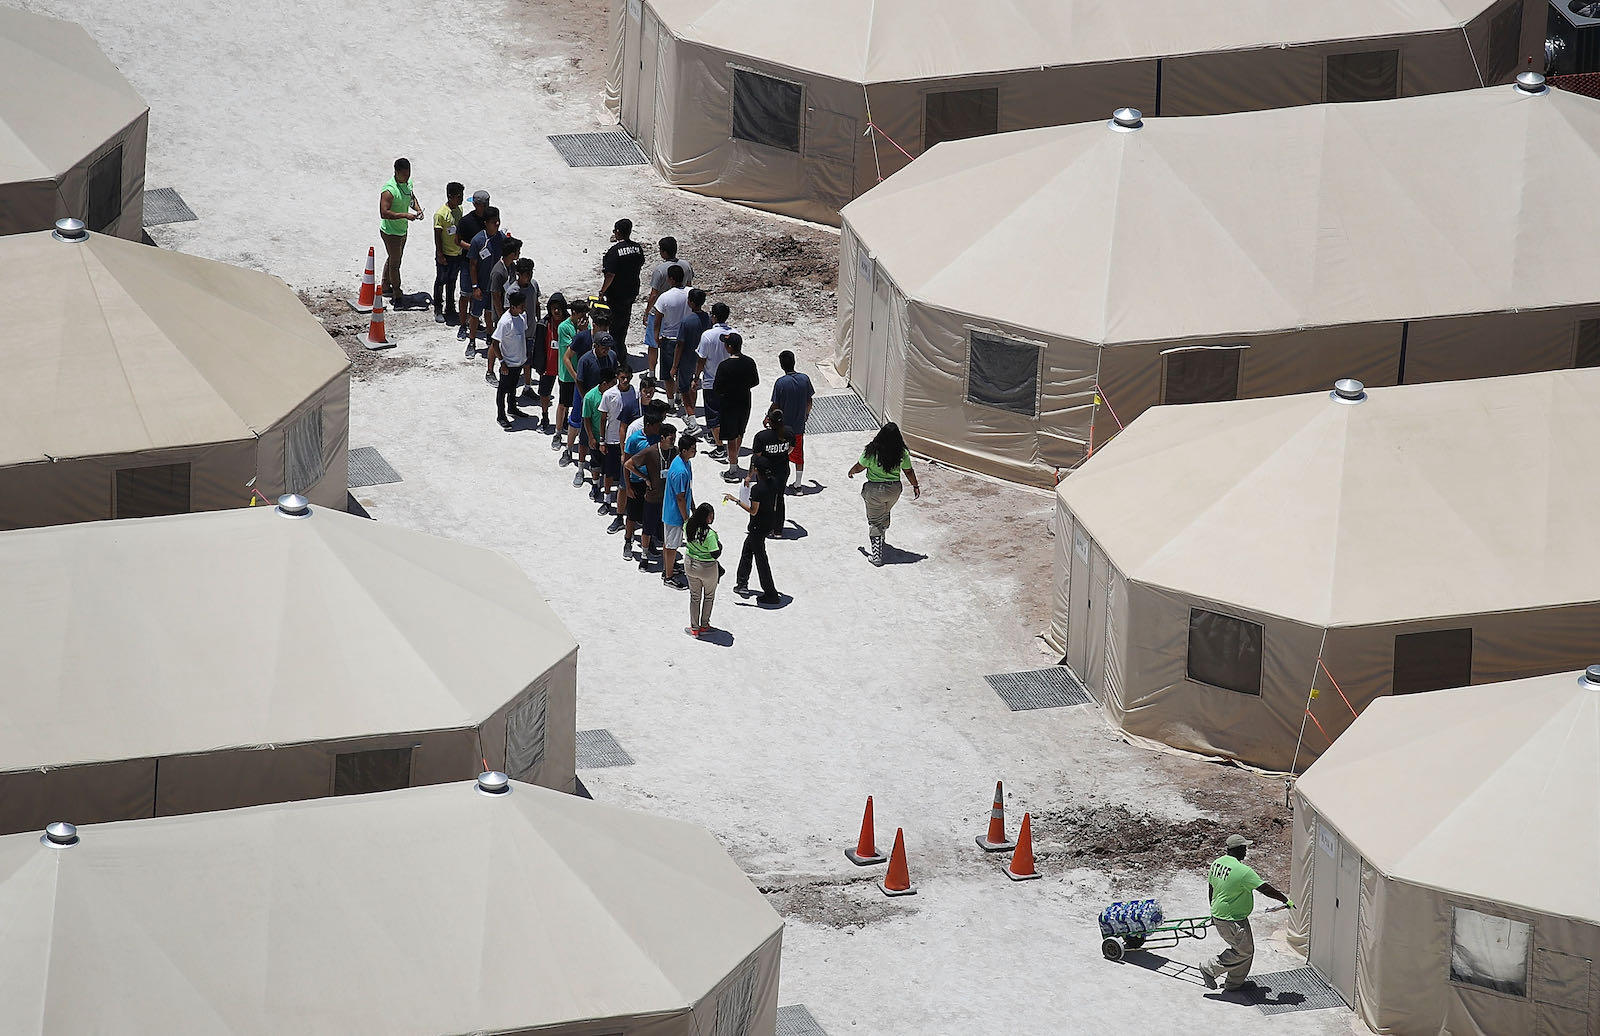 Migrant children lining up at a tent encampment detention facility, Texas, 2018